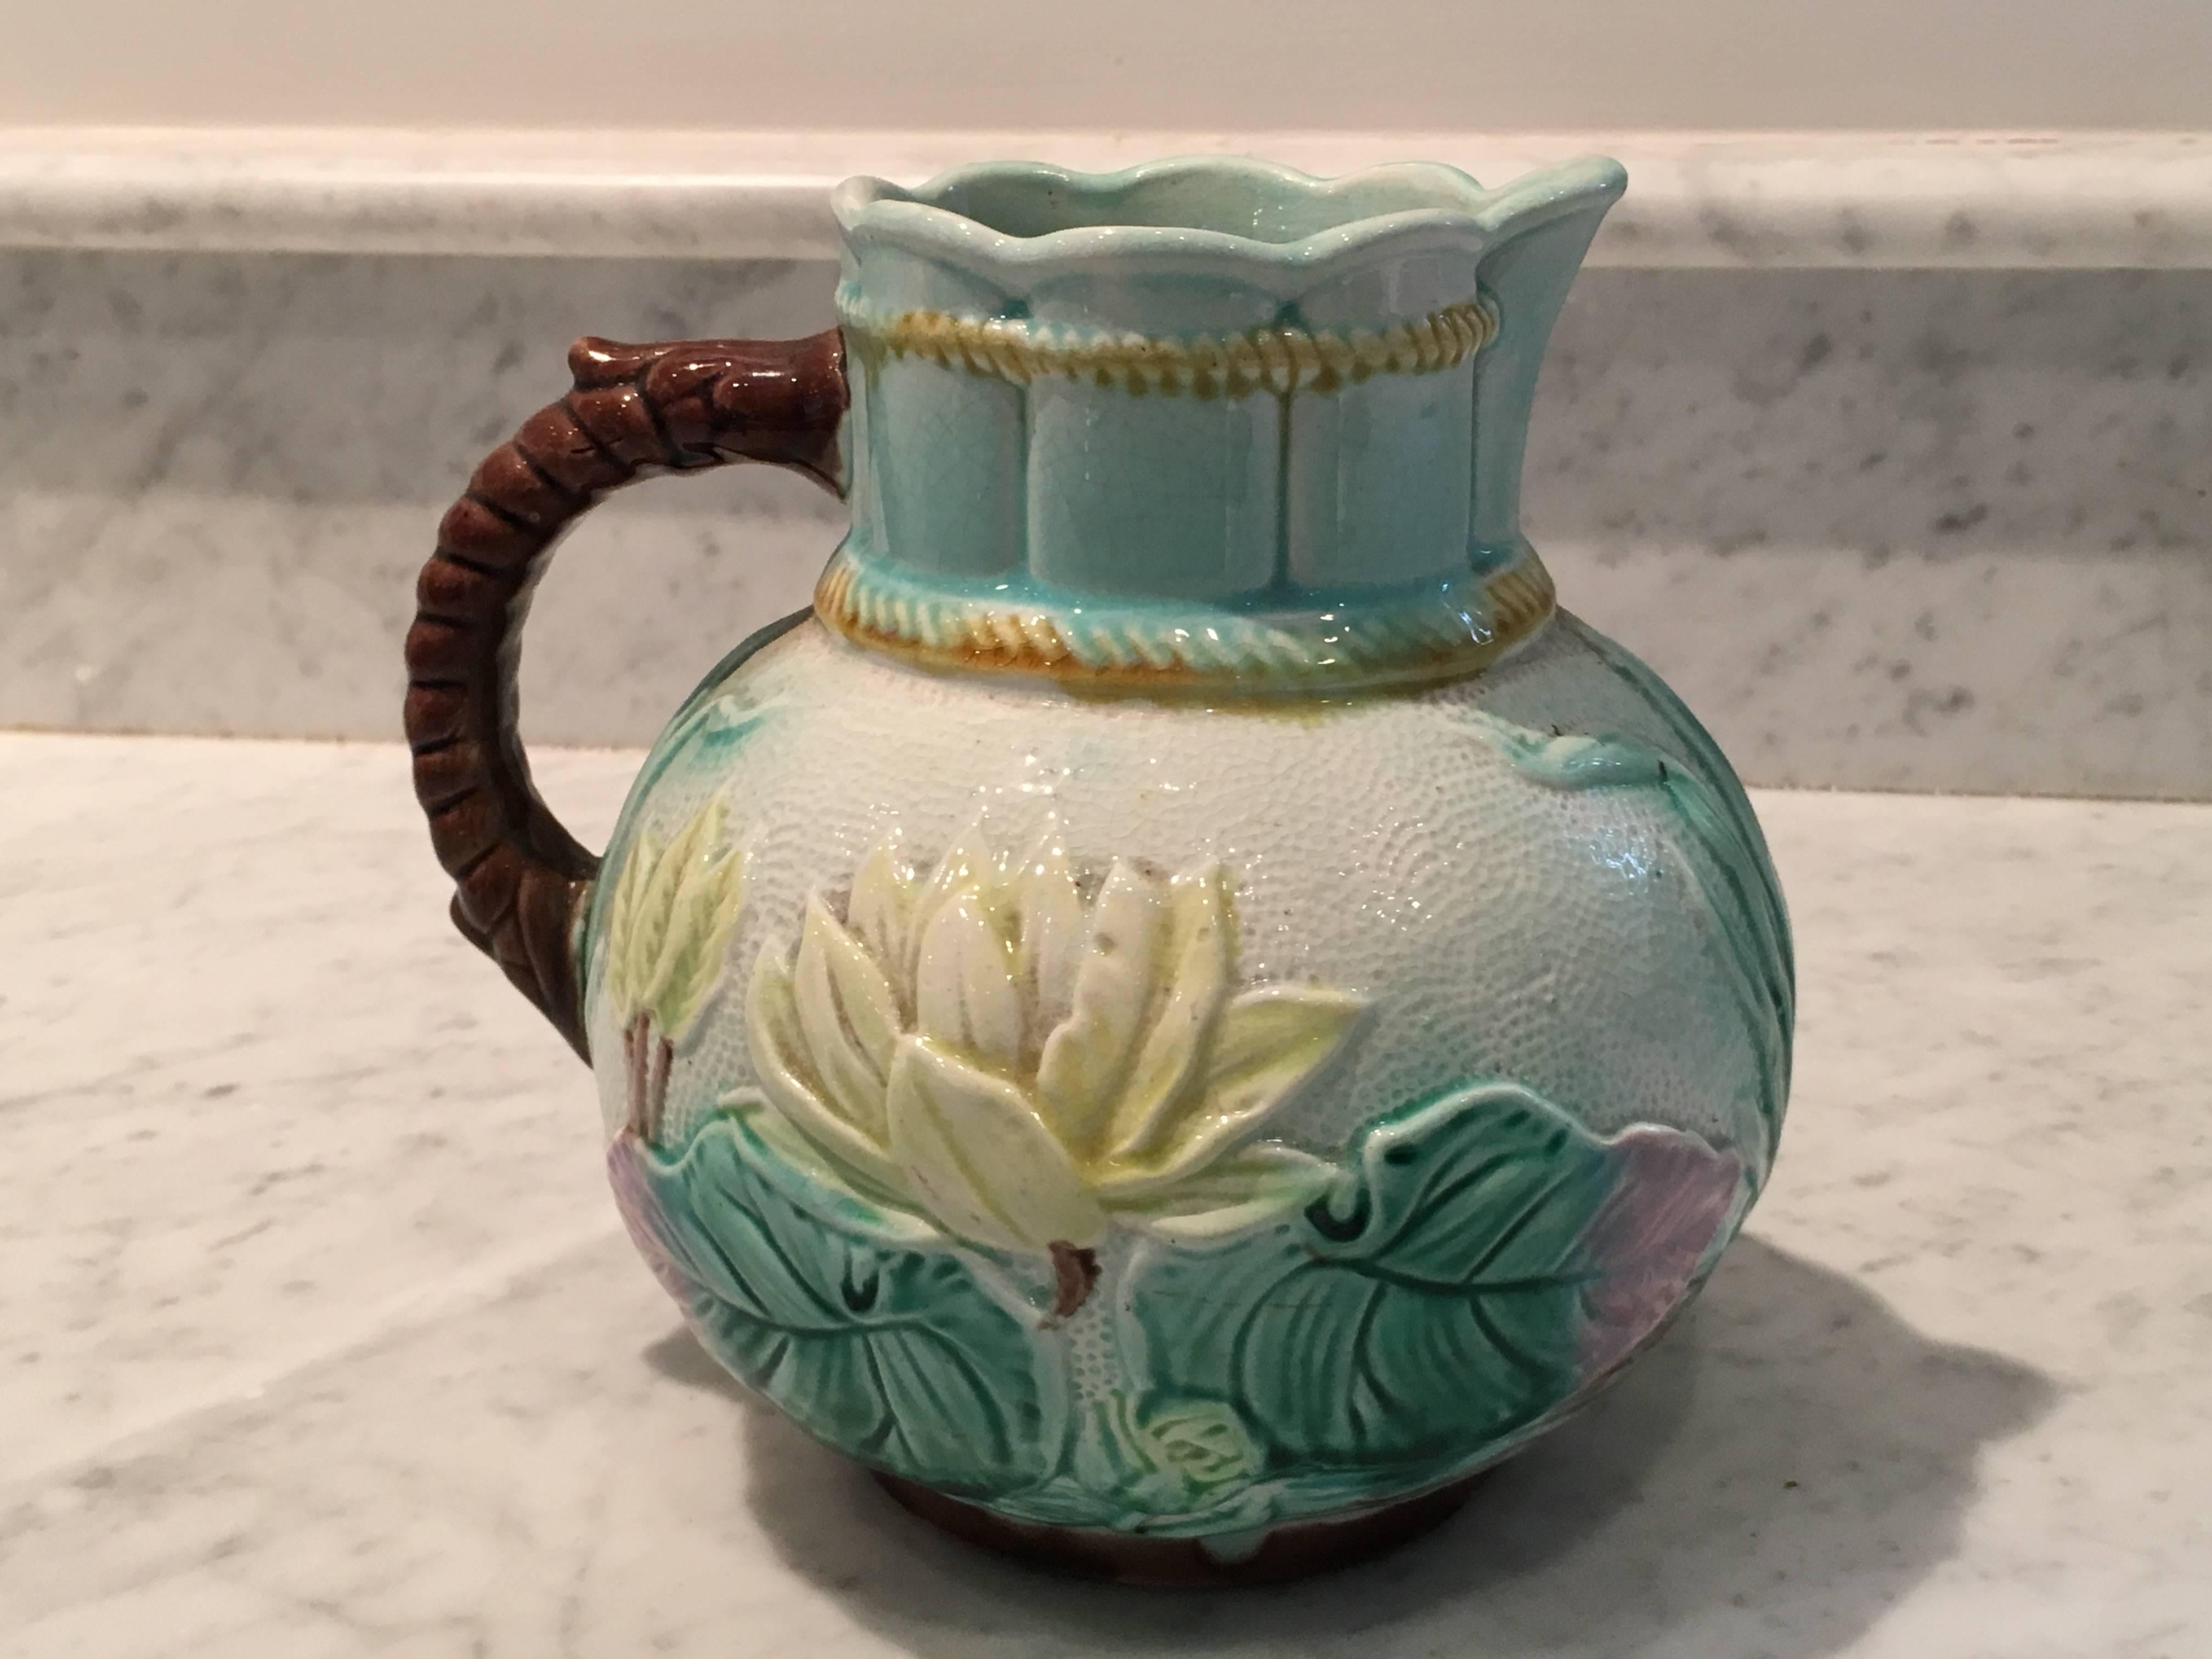 Beautifully detailed water lilies decorate this antique Majolica pitcher in shades of turquoise, yellow and pink. Turquoise interior. Signed/marked in brown paint on bottom.